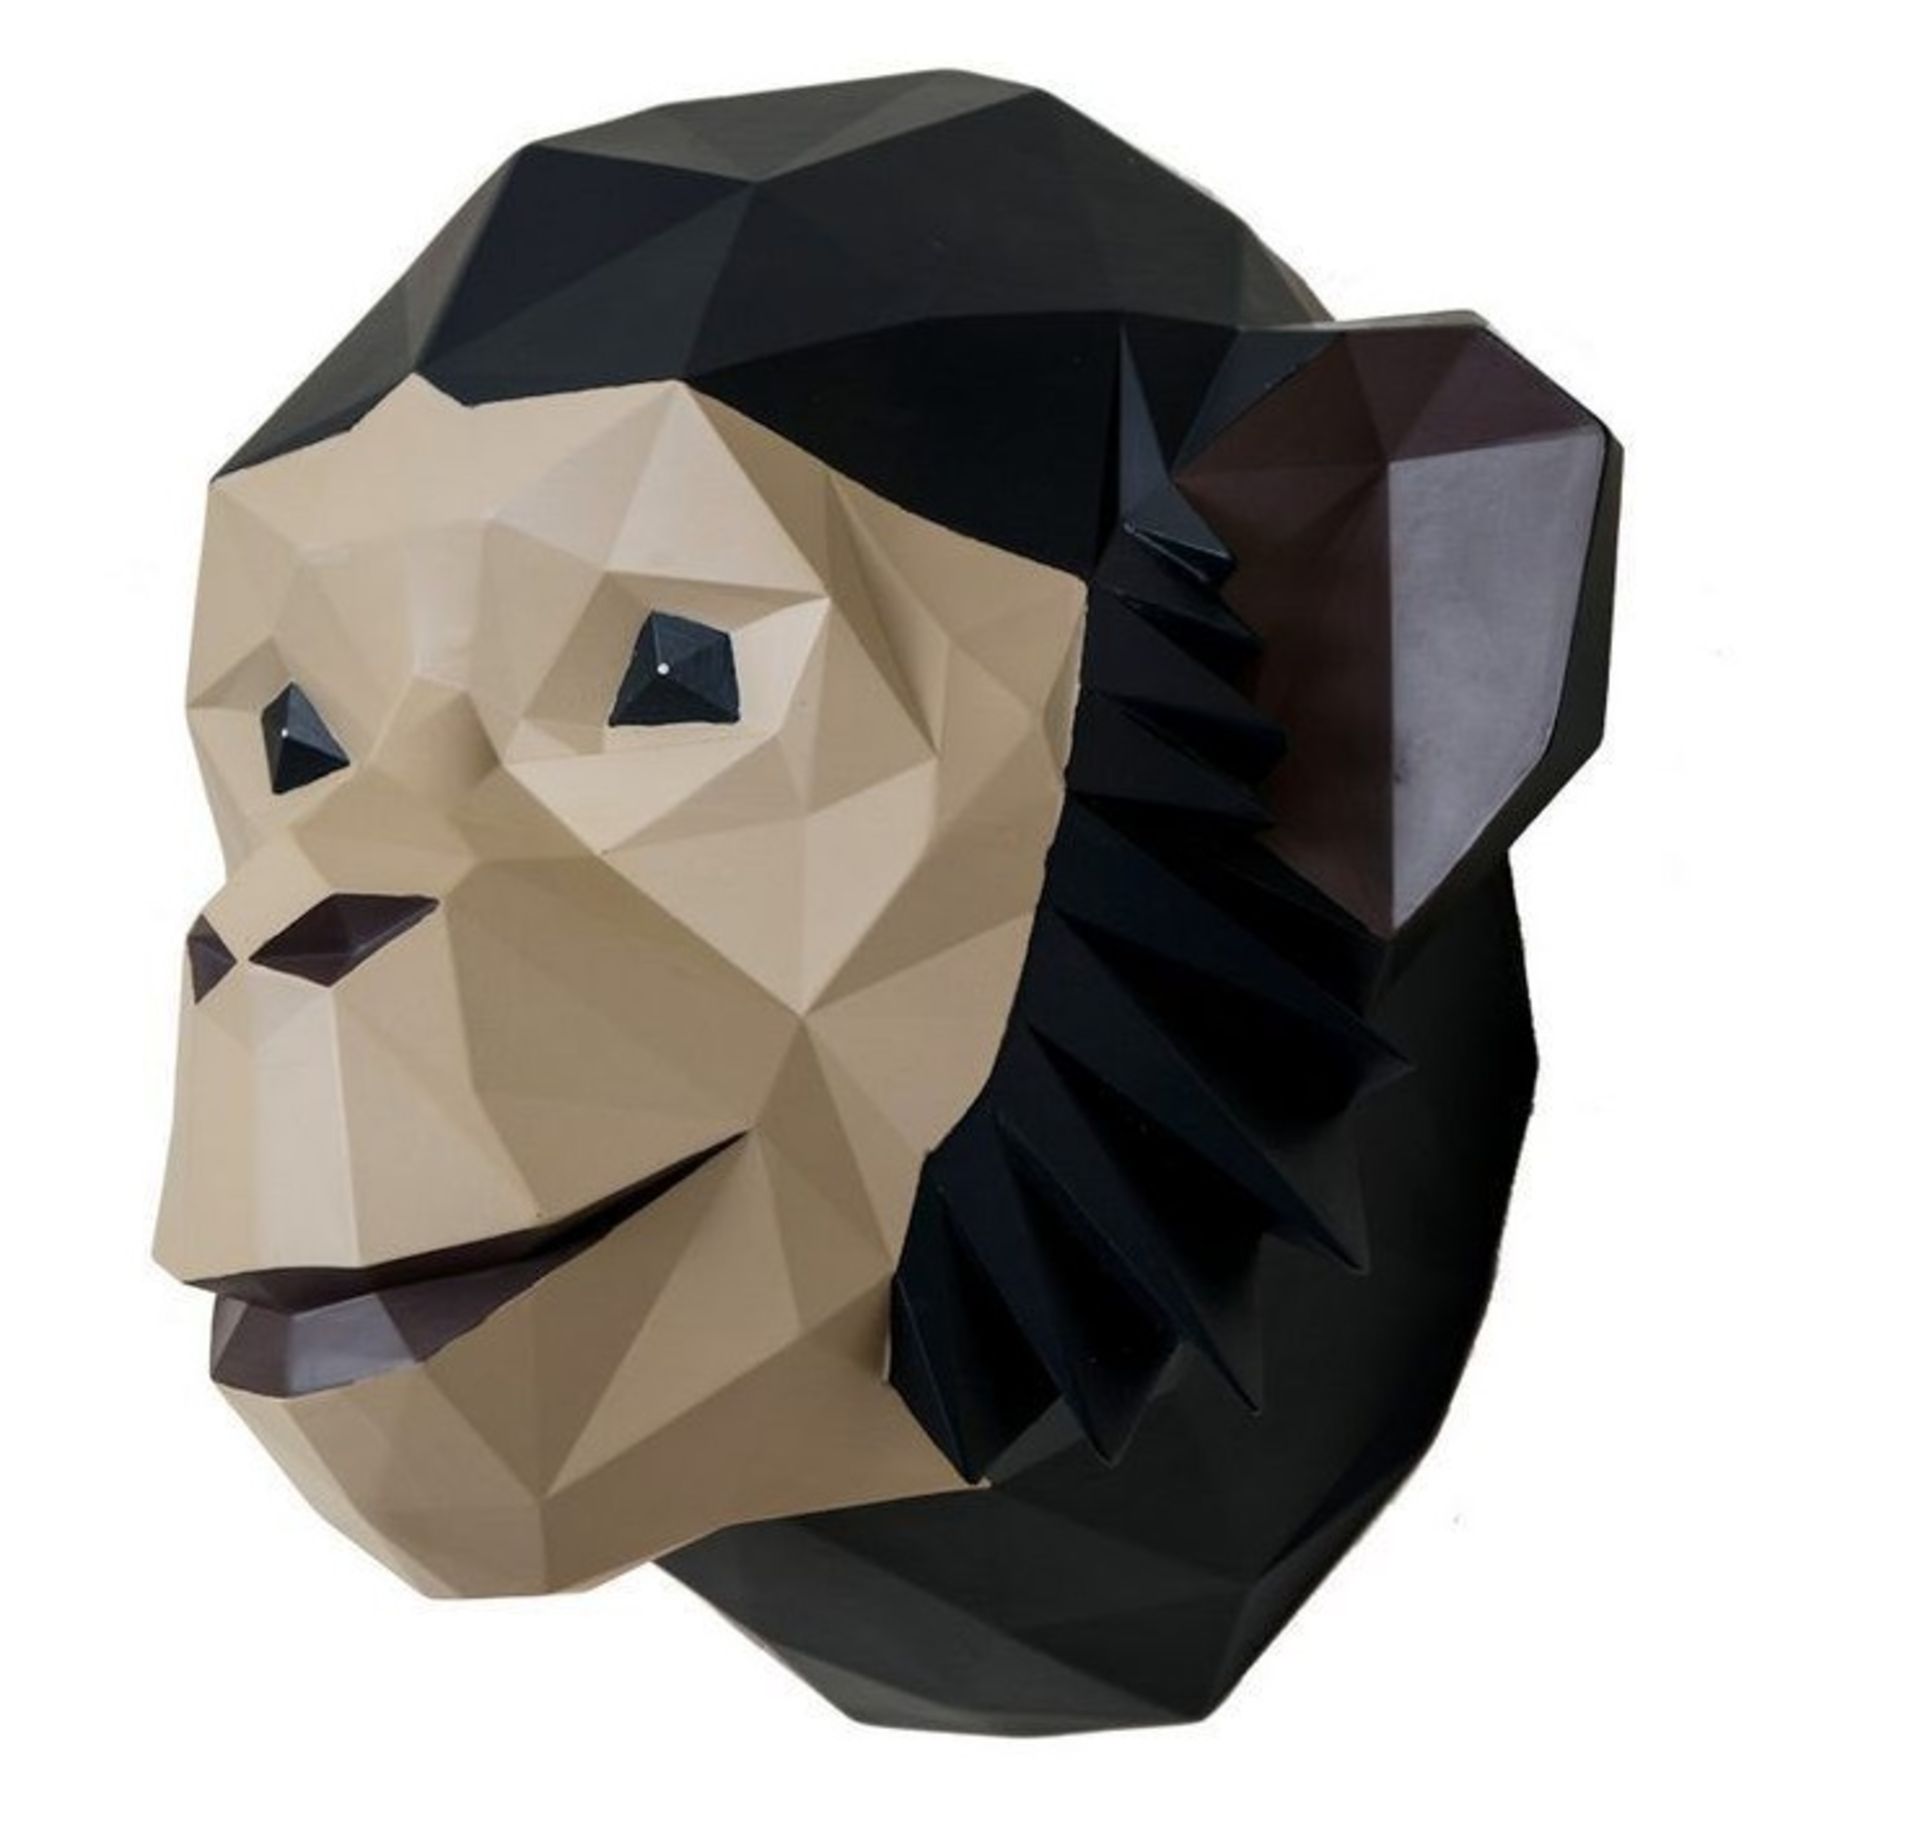 1 x Artistic Origami Monkey Head Wall Hanging - Dimensions H31cm W36cm D24cm - Brand New & Boxed